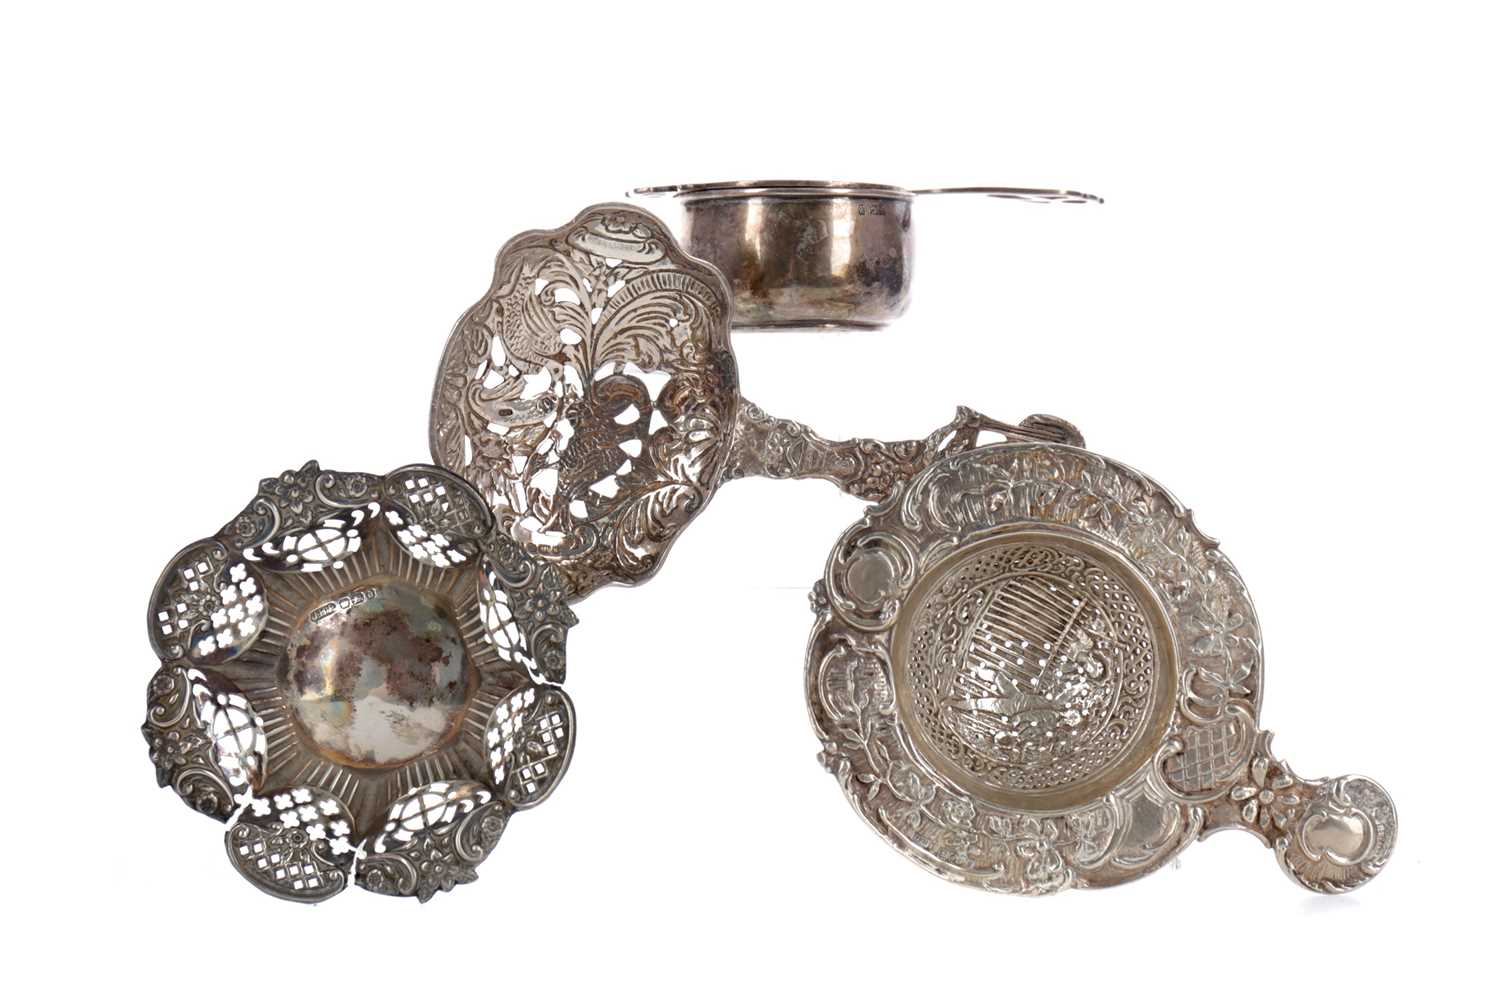 Lot 419 - A LOT OF THREE SILVER TEA STRAINERS, AND A BONBON DISH